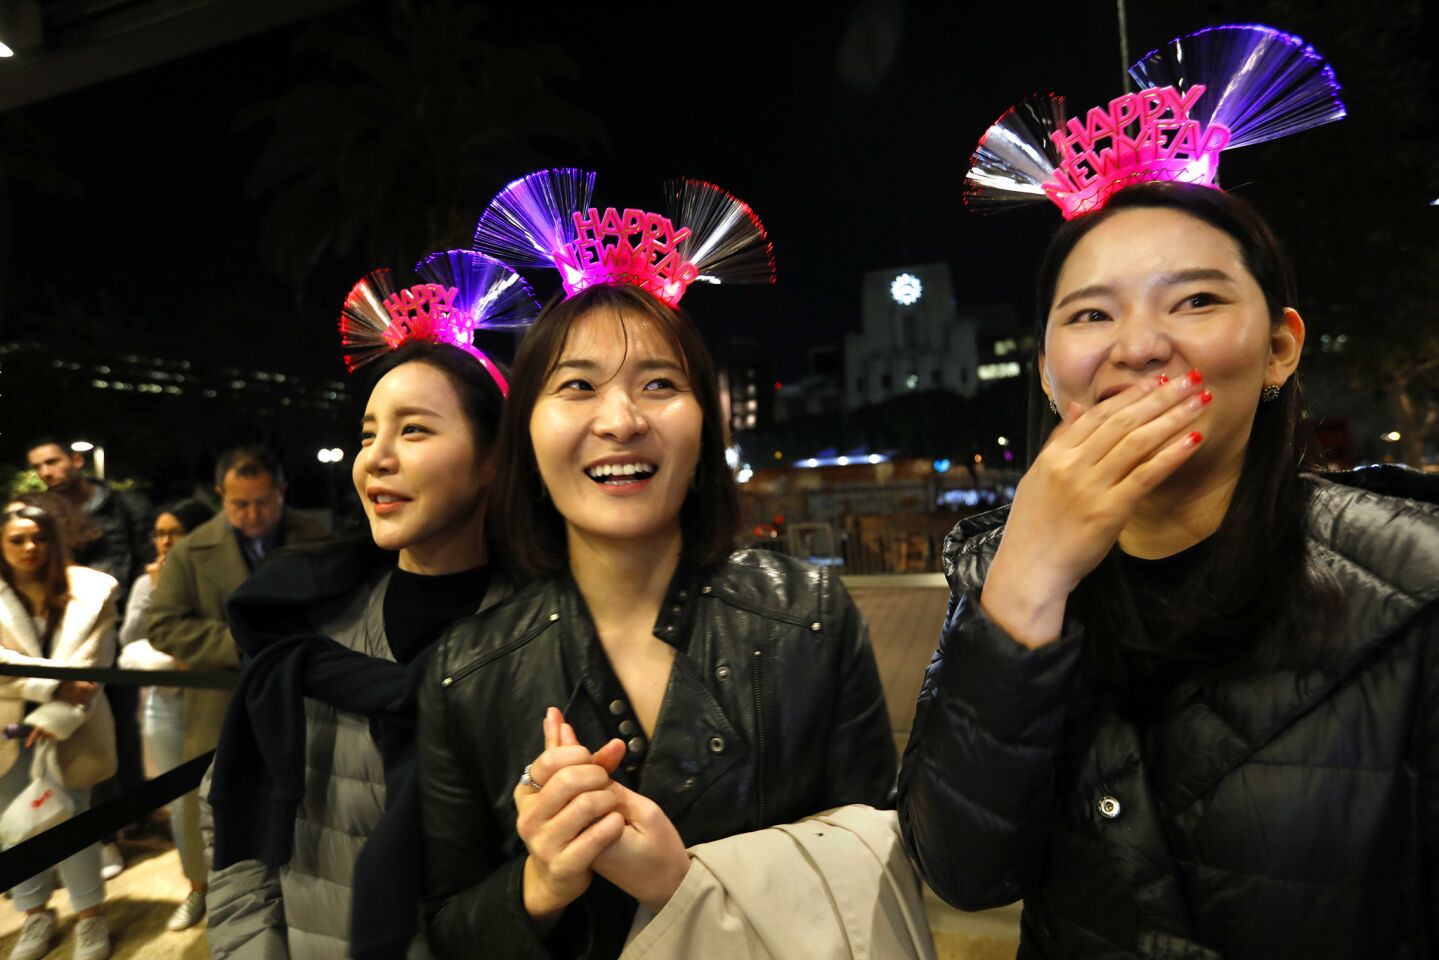 Sunny Jang, left, Hayden Bark and Jinney Lee were among those on hand for the New Year's Eve celebration at Grand Park and the Music Center in downtown Los Angeles. About 50,000 people were expected to attend. The theme was L.A. Dreams, which, according to the Music Center, "imagines the future of L.A. County" through the "thoughtfulness and creativity of its children." Local fifth-graders contributed essays, drawings and more.